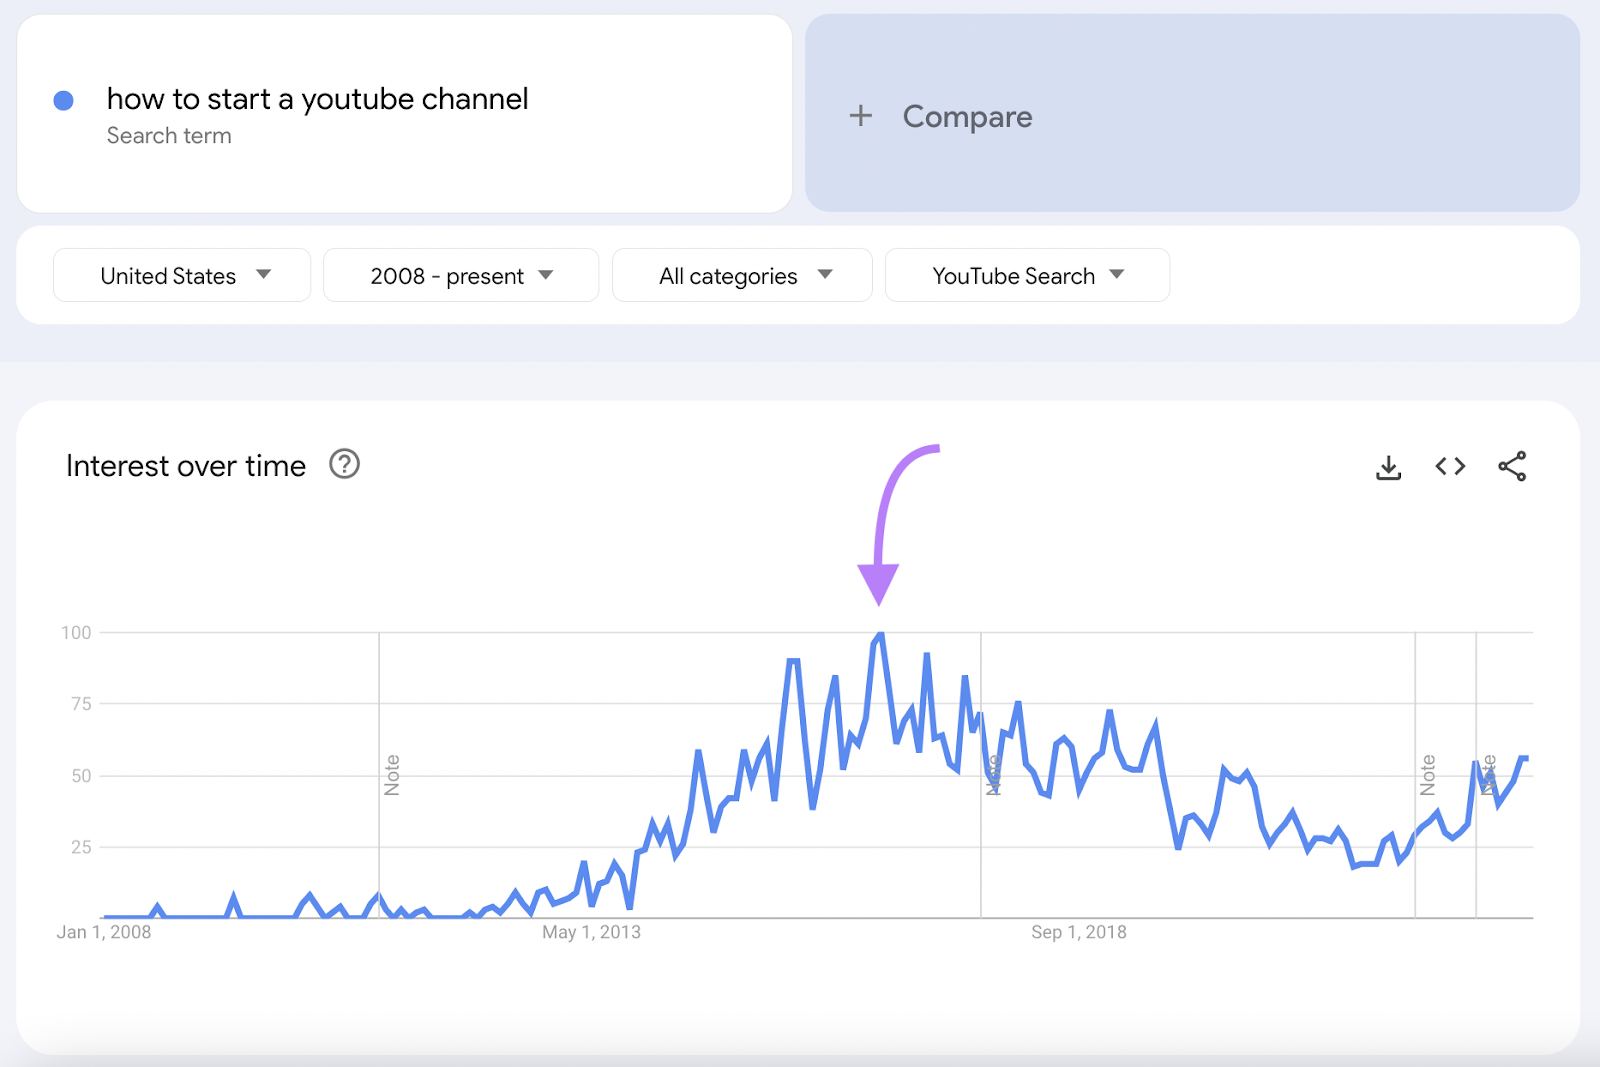 Google Trends "Interest over time" graph for "how to start a youtube channel" in the US